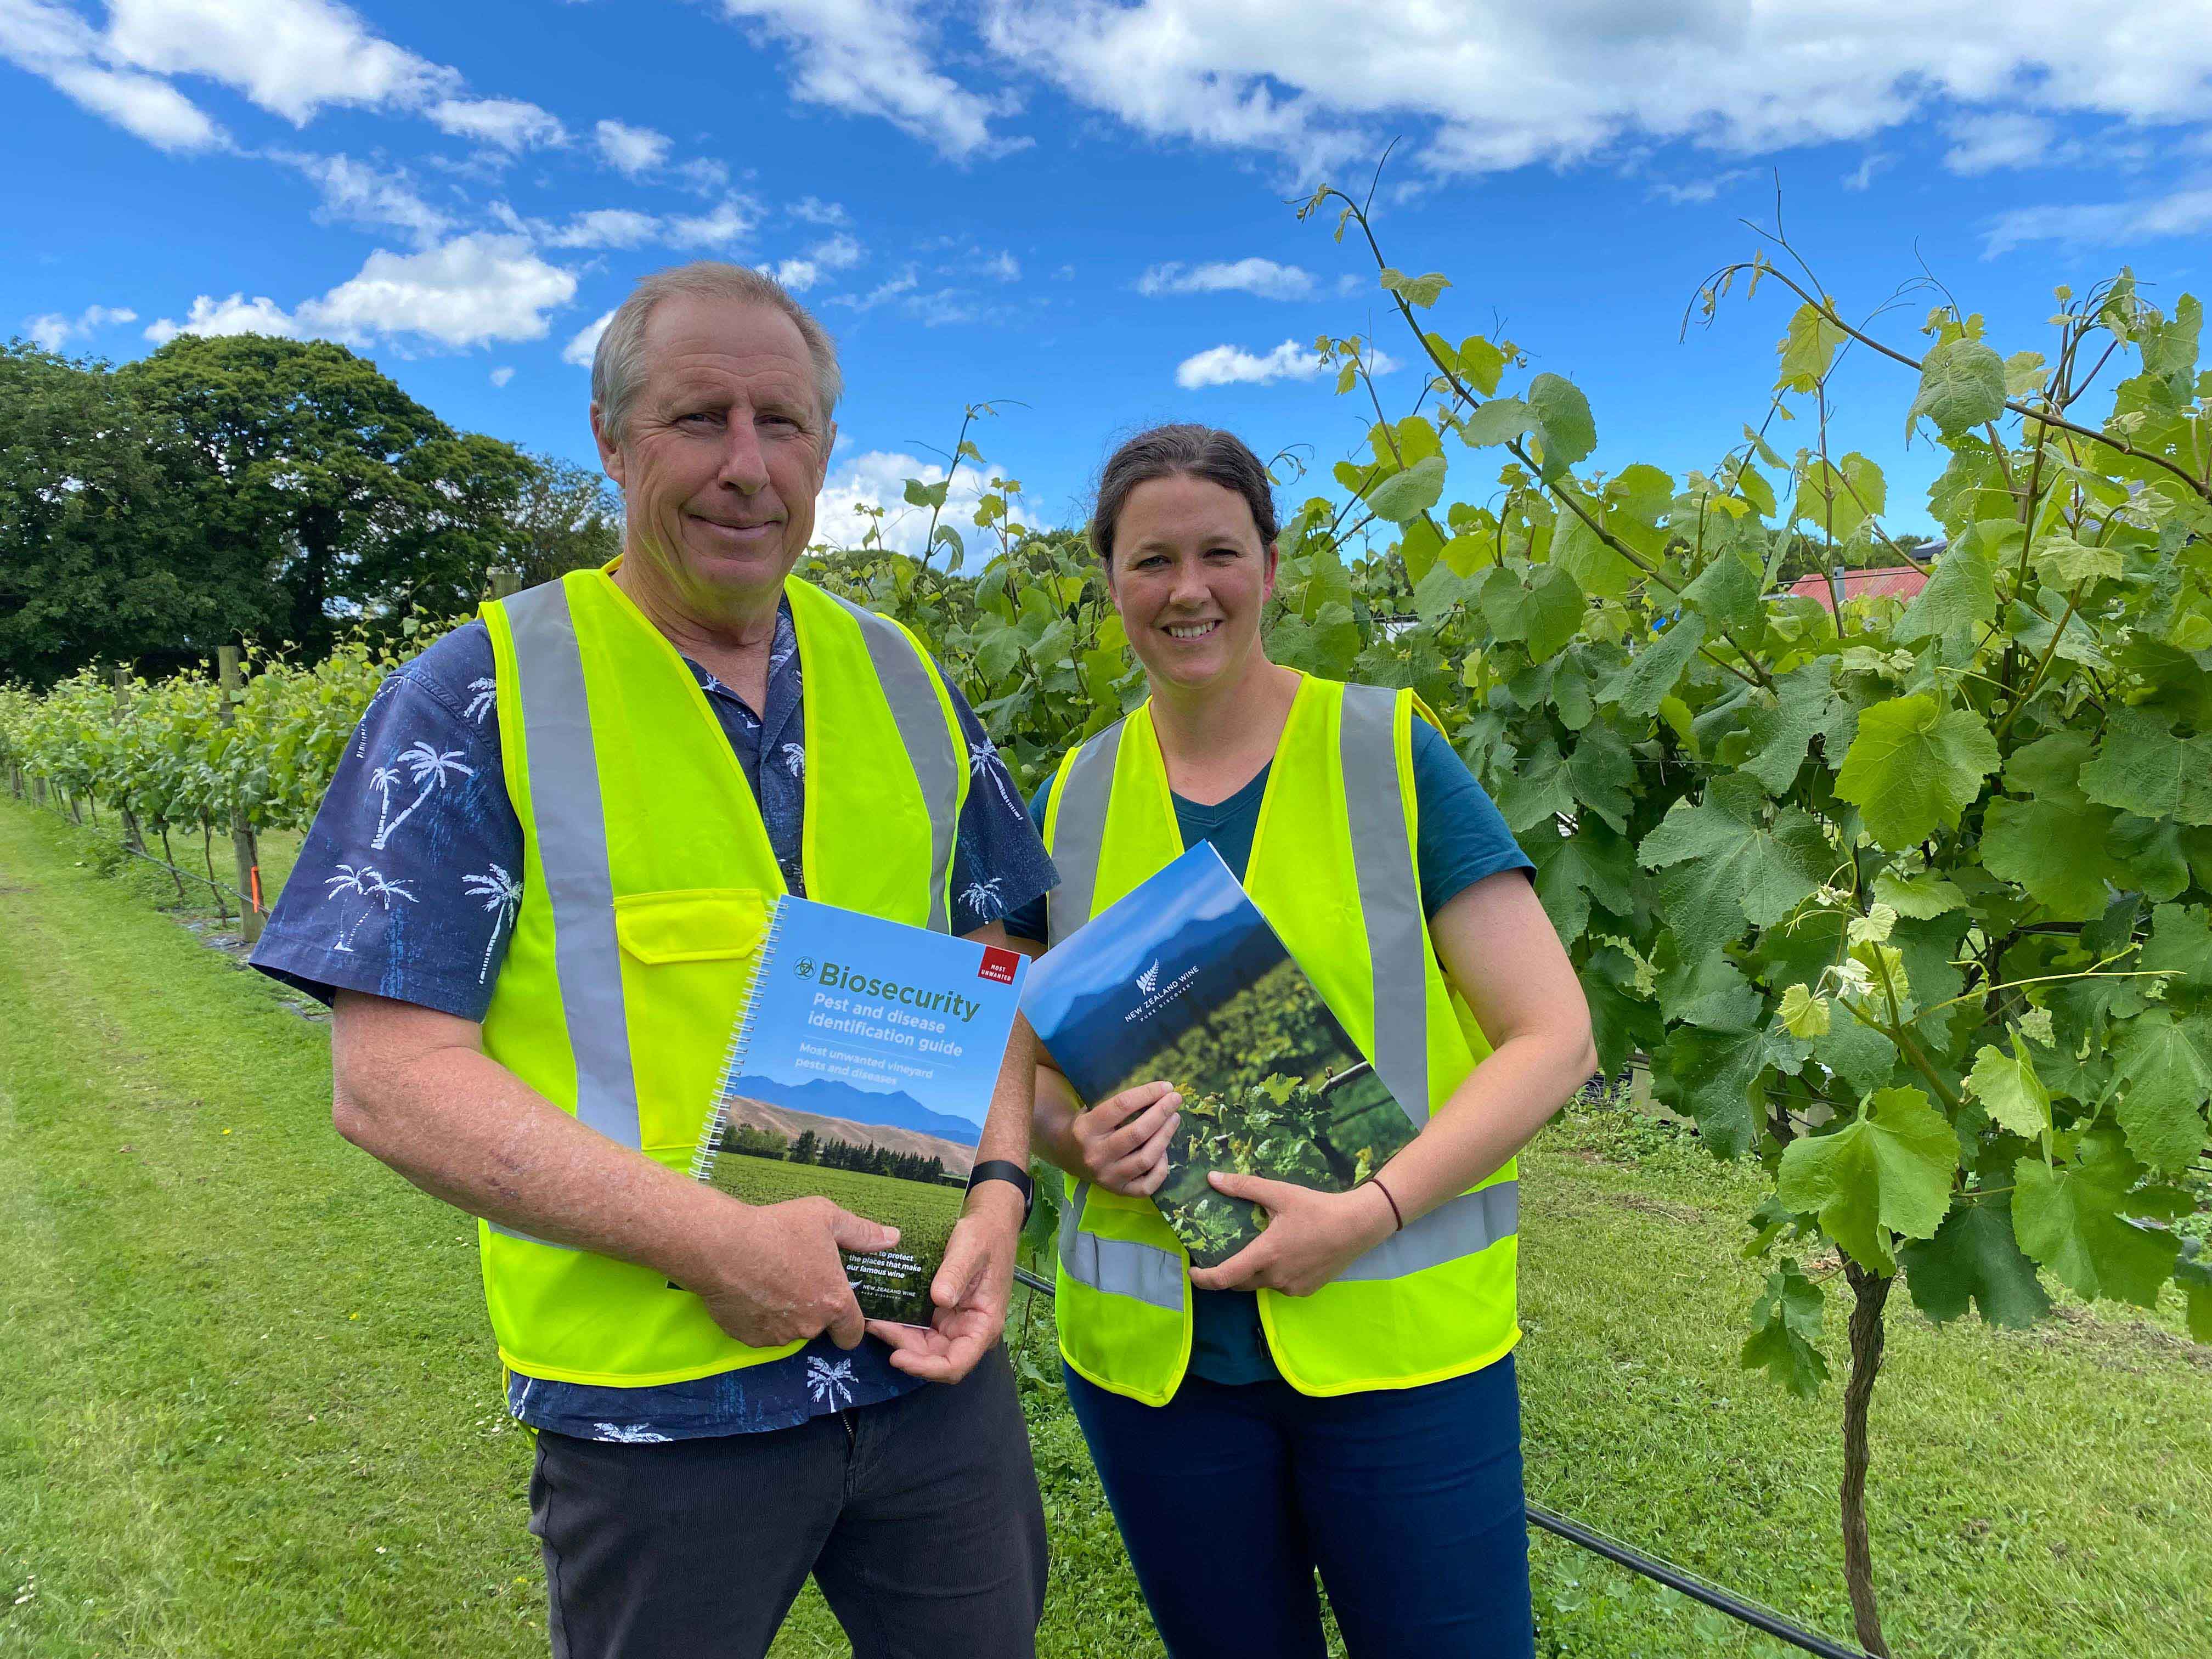 Finalist: New Zealand Winegrowers – Developing biosecurity champions